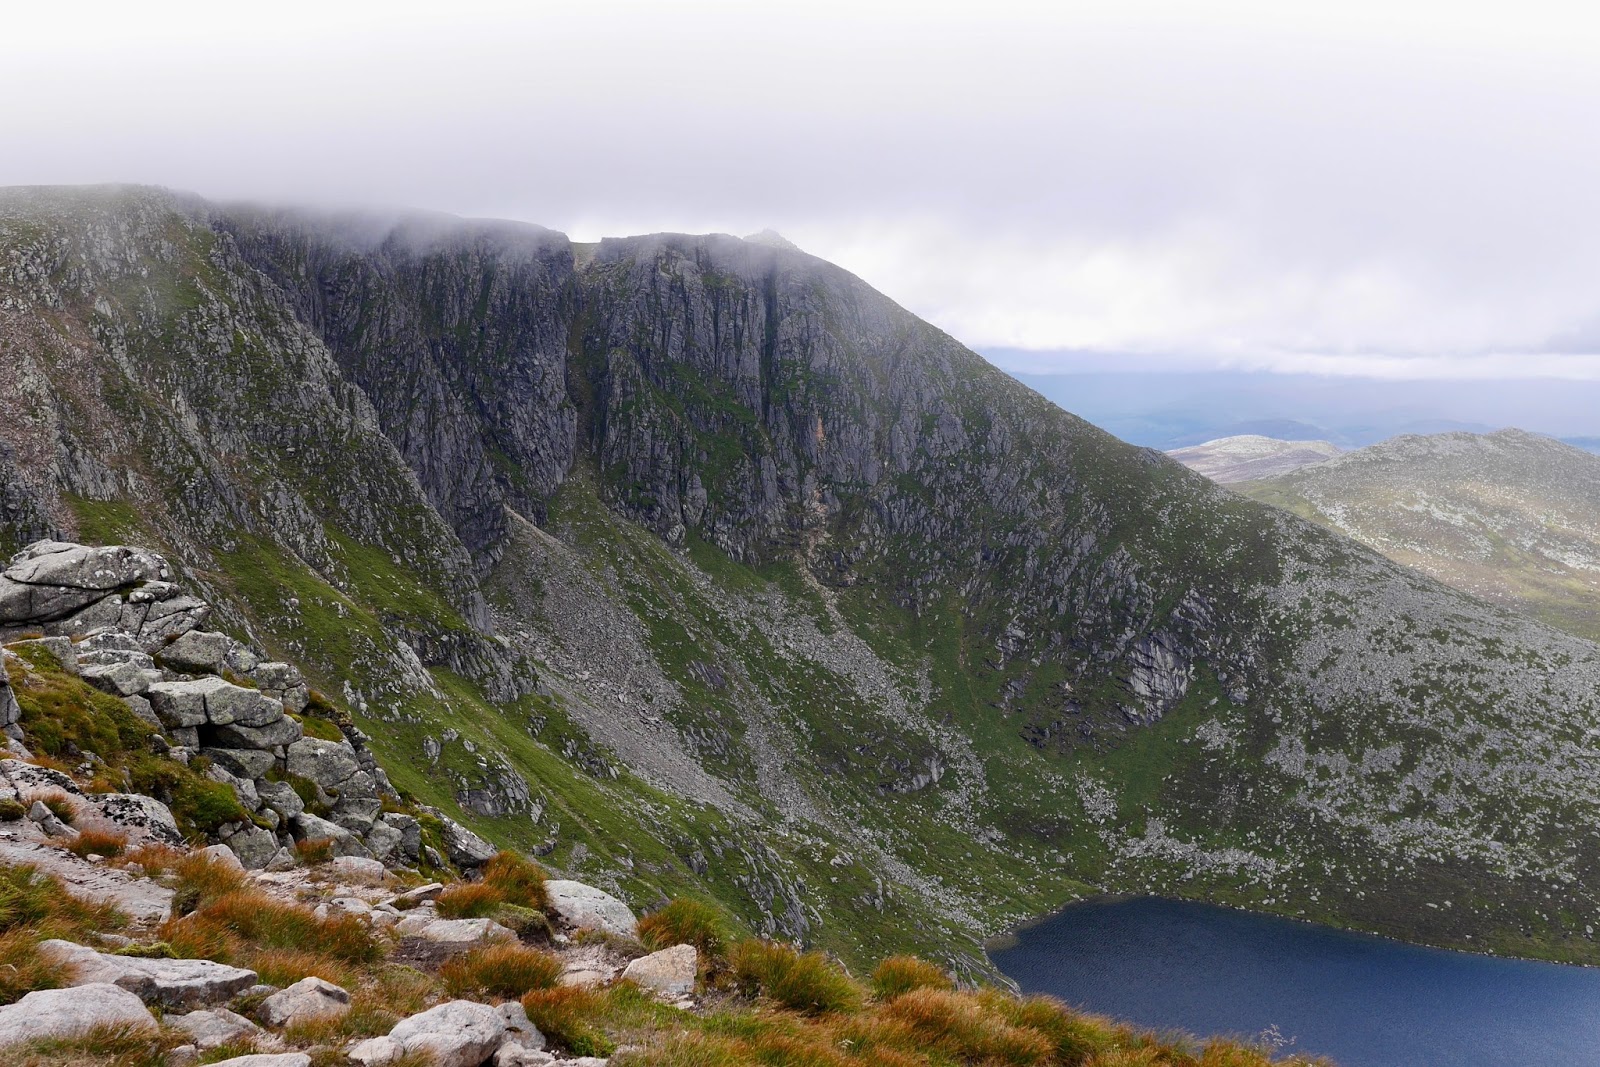 Loch at the top of Lochnagar Munro - Cal McTravel - www.calmctravels.com